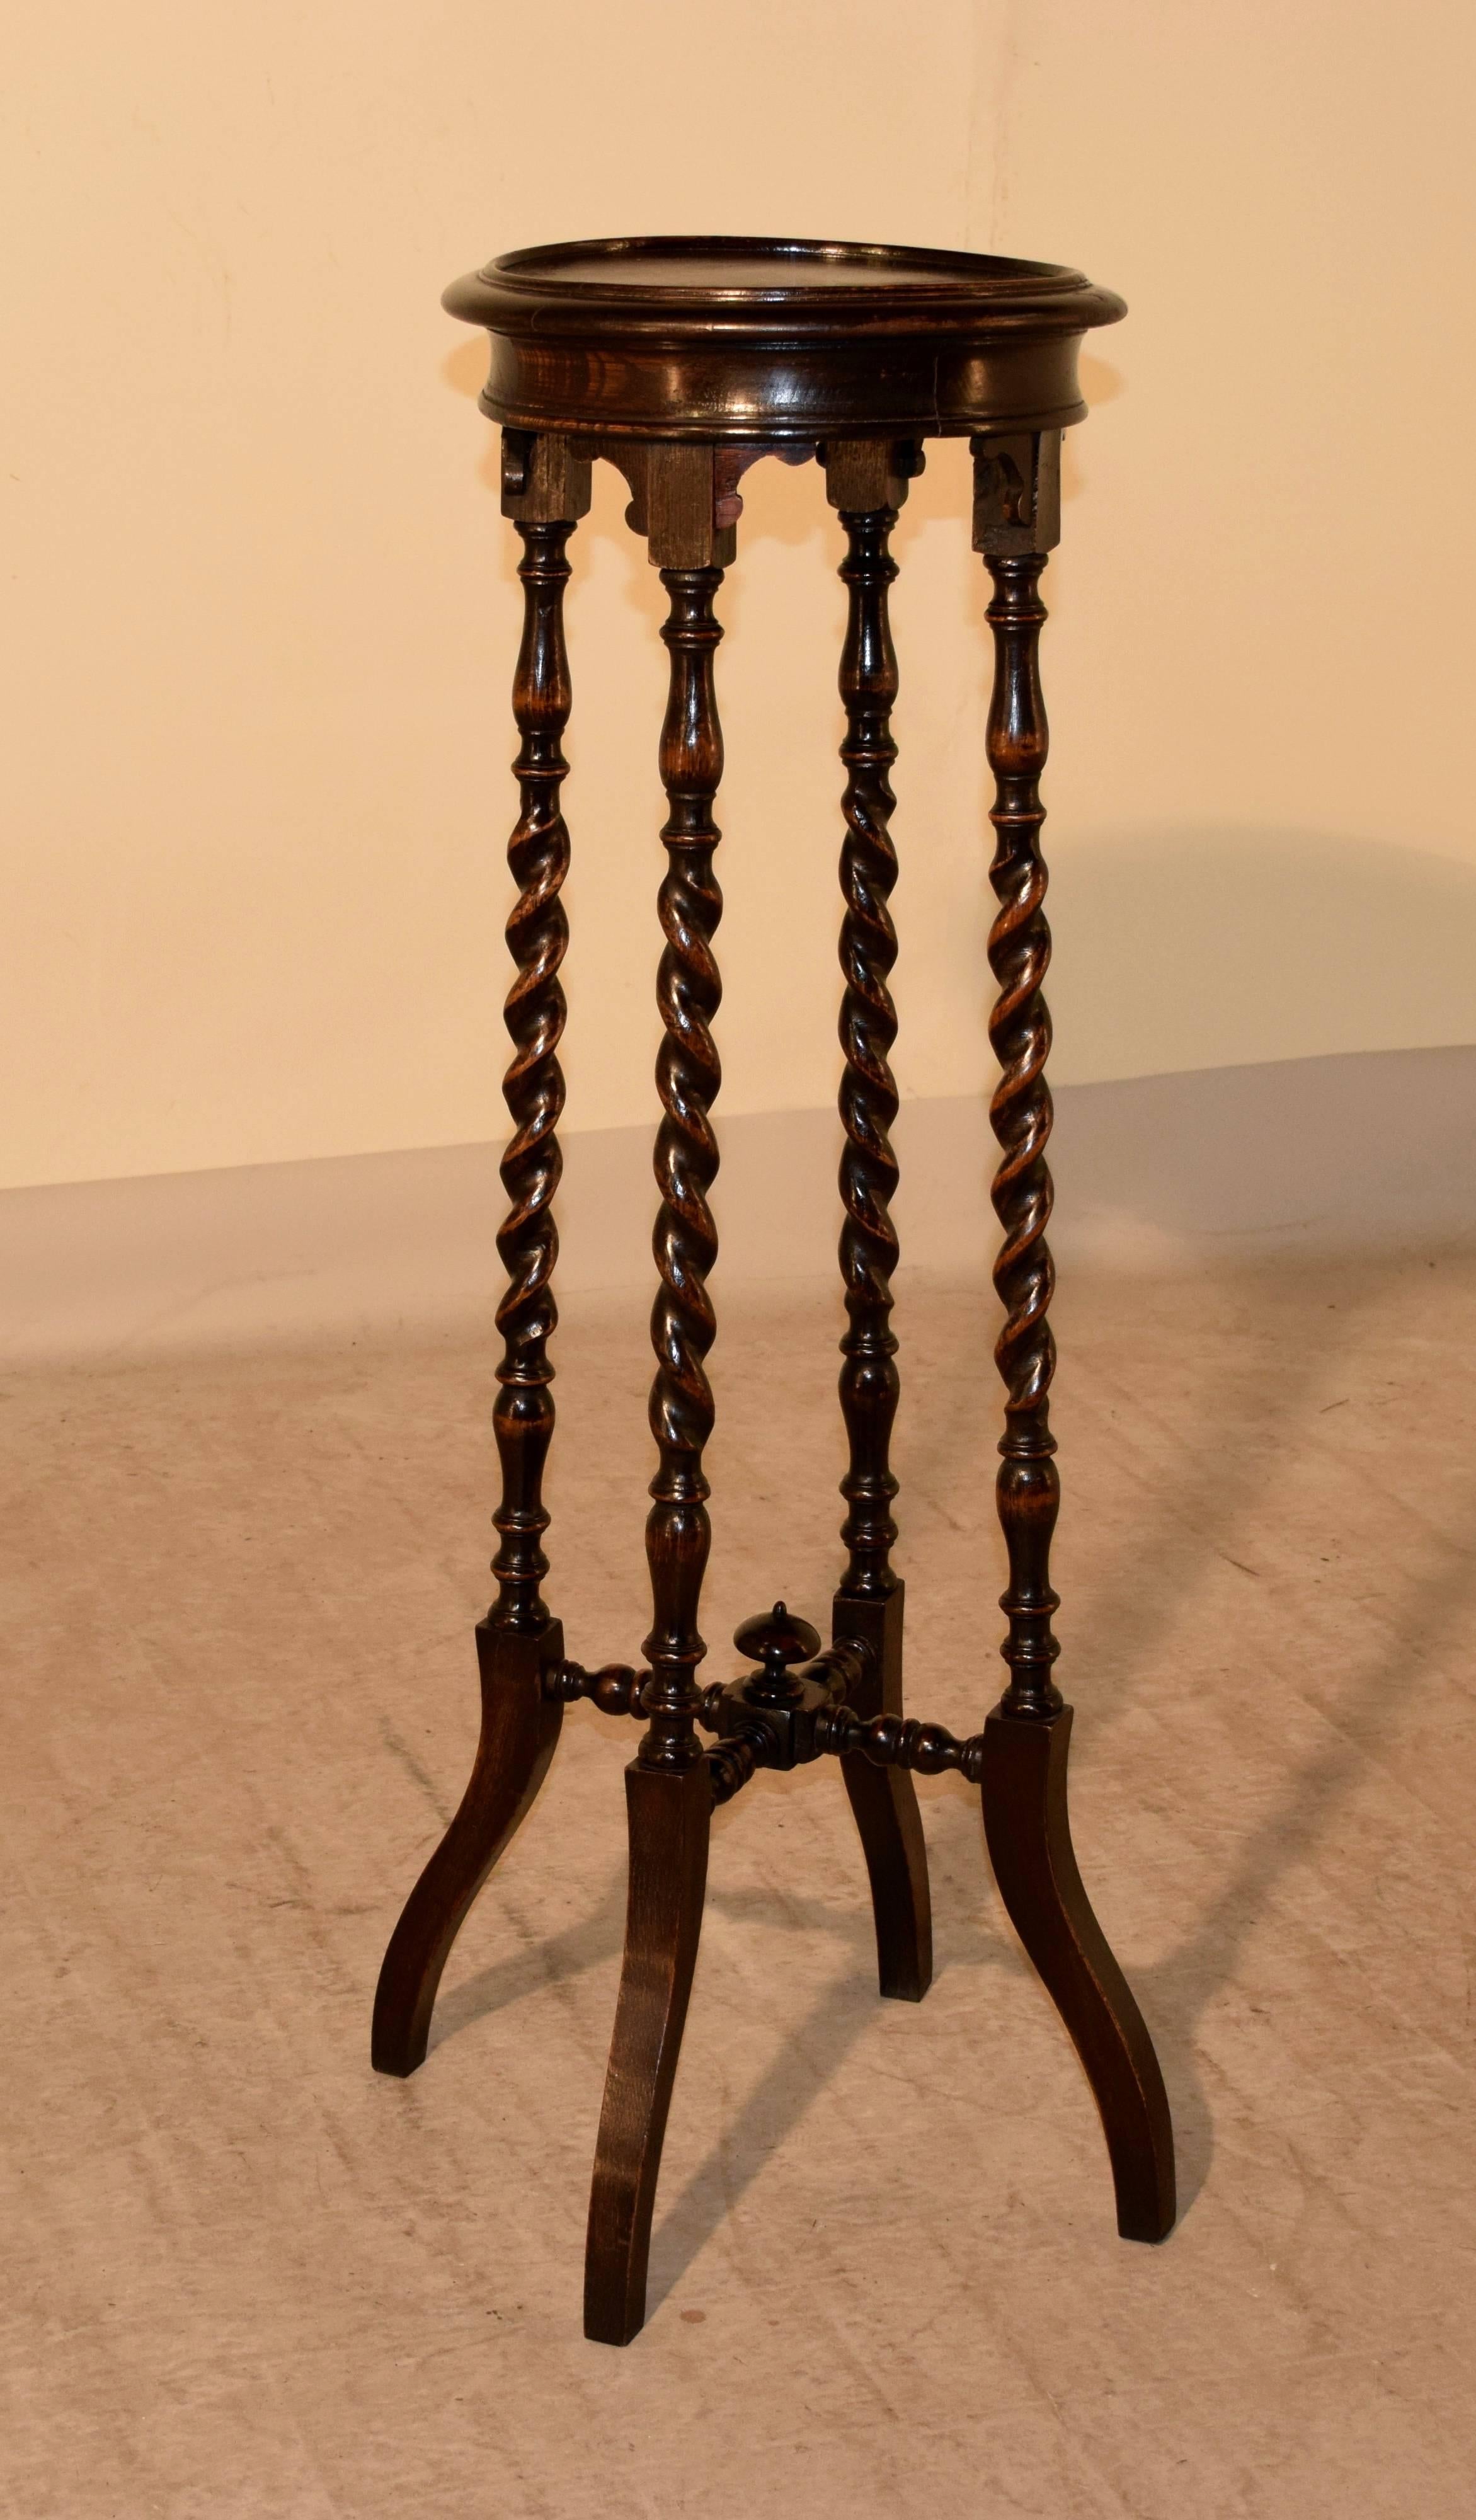 Late 19th century English oak plant stand with a molded rim around the top, following down to a wide apron, which also has a molded edge. The piece is supported on hand-turned barley twist legs, joined by turned cross stretchers, embellished with a